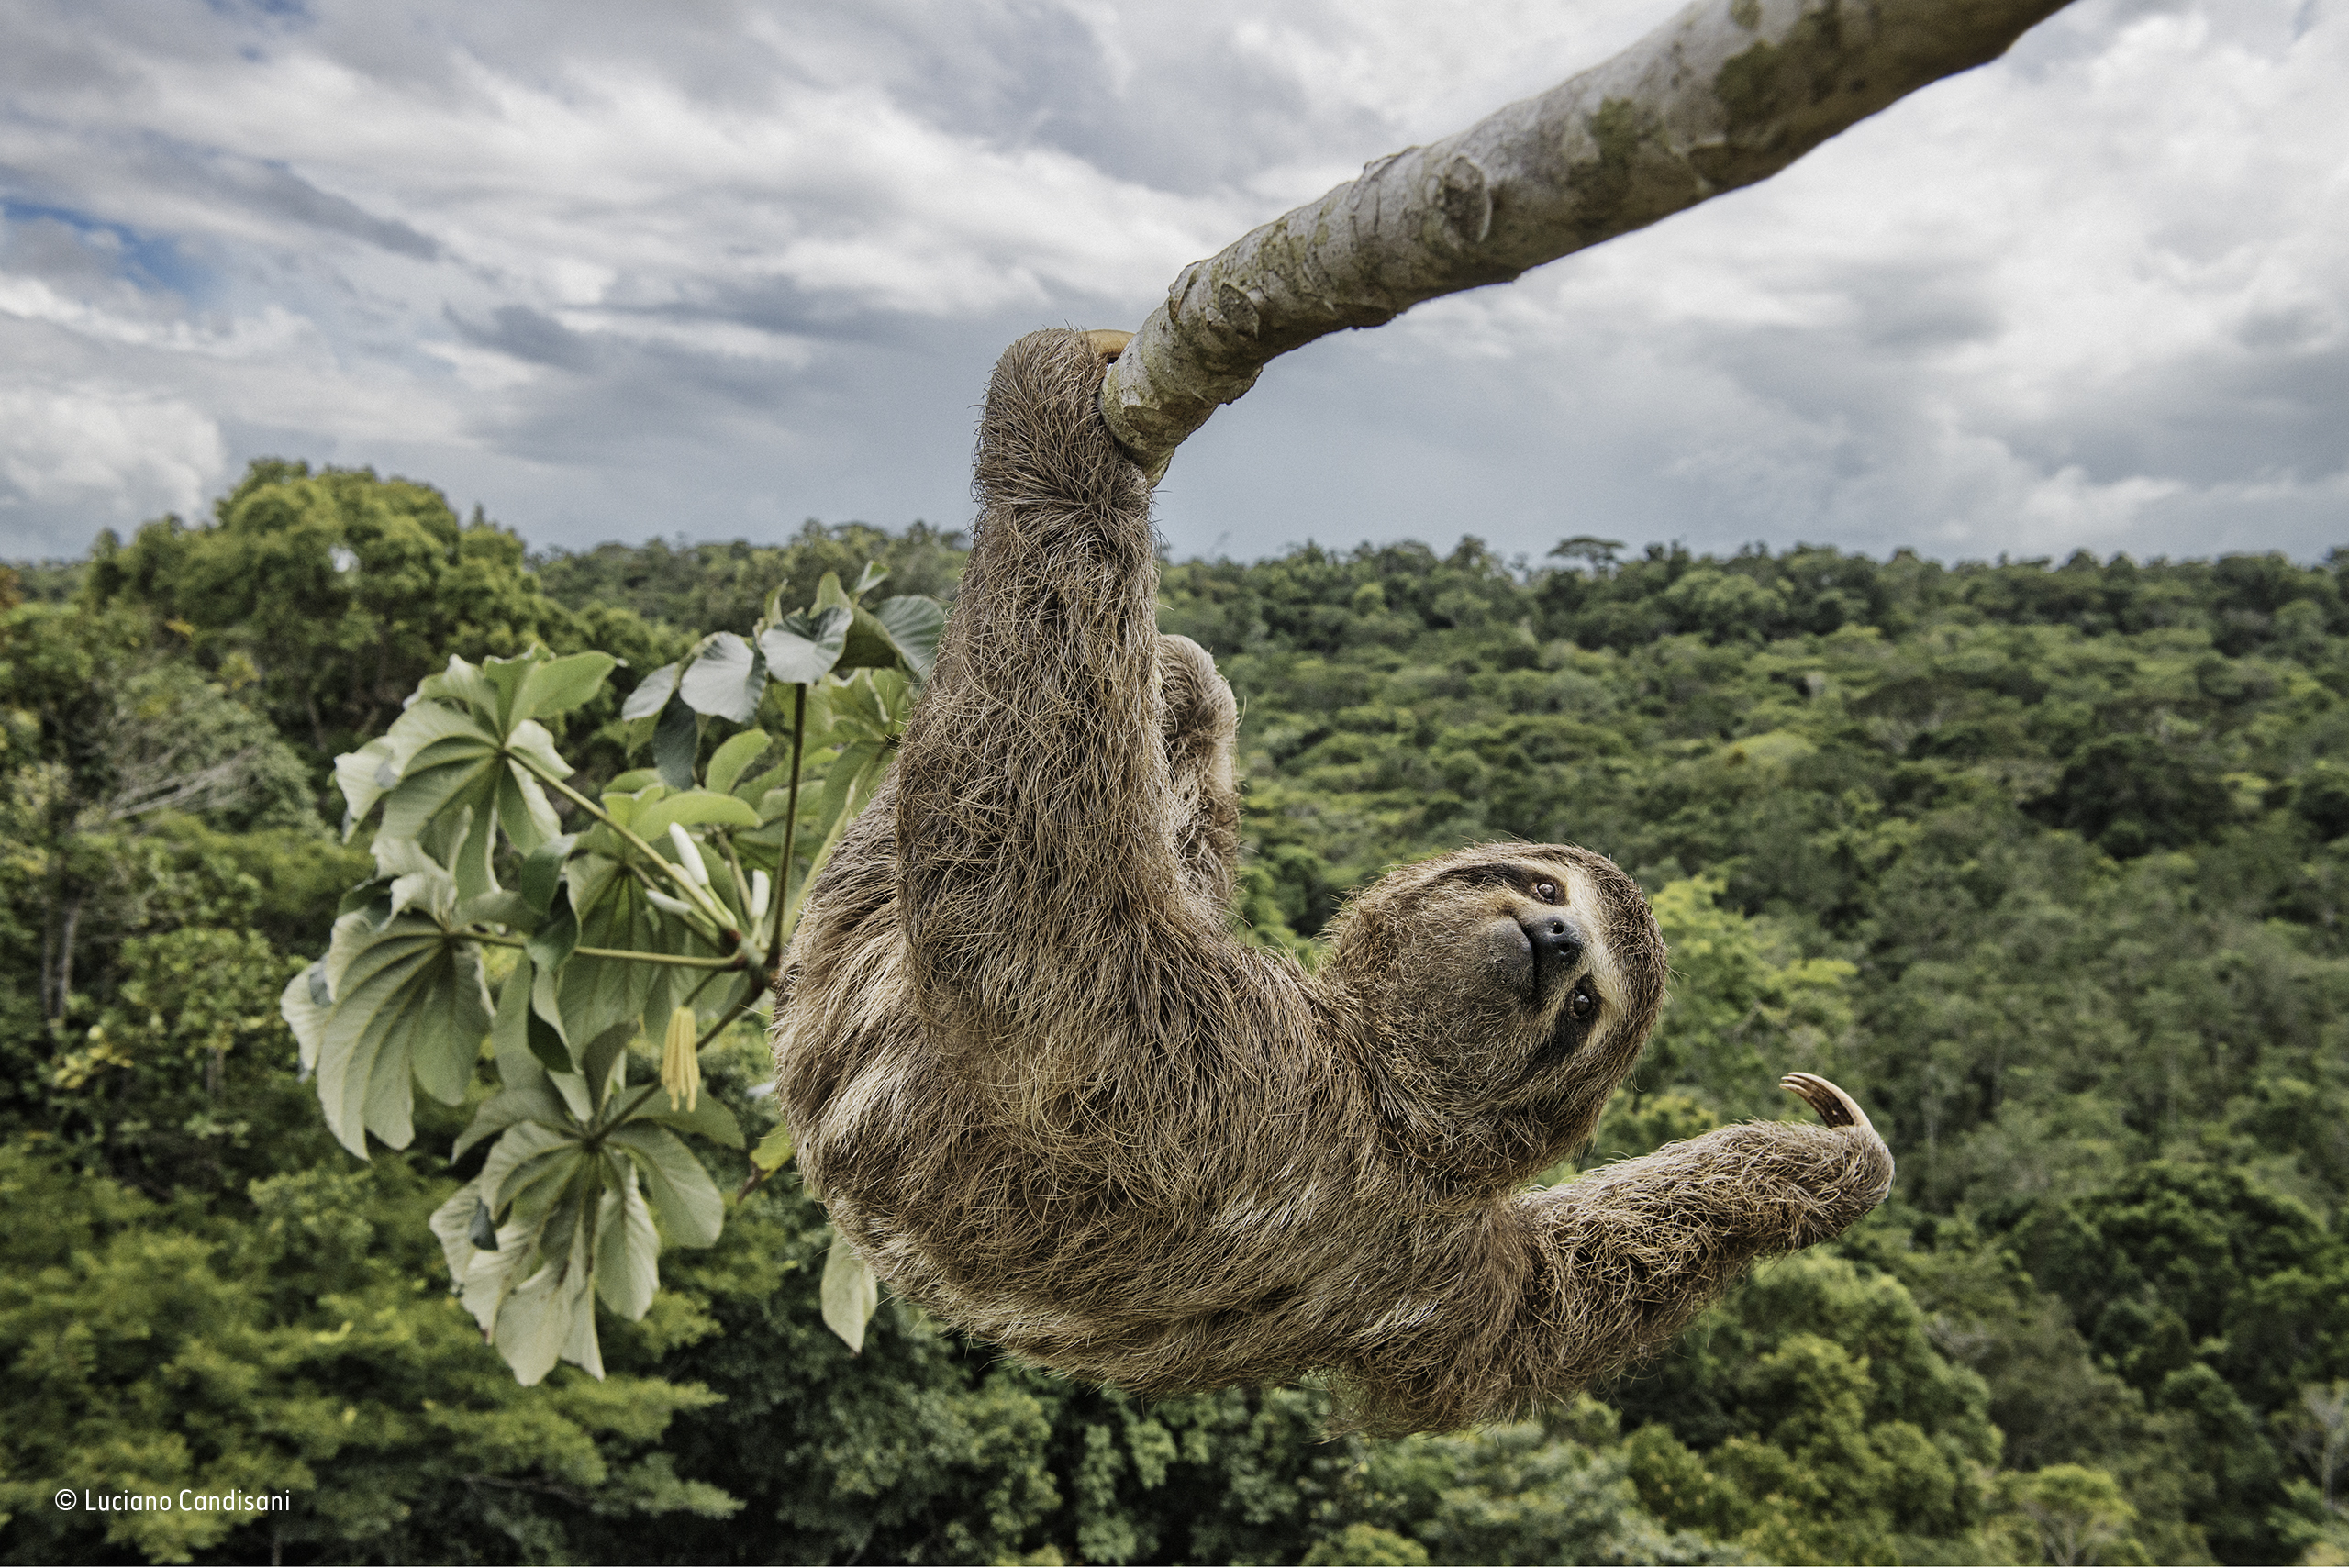 Sloth hanging outLuciano Candisani, BrazilLuciano had to climb the cecropia tree, in the protected Atlanticrainforest of southern Bahia, Brazil, to take an eye-level shot of thisthree-toed sloth. Sloths like to feed on the leaves of these trees,and so they are often seen high up in the canopy.